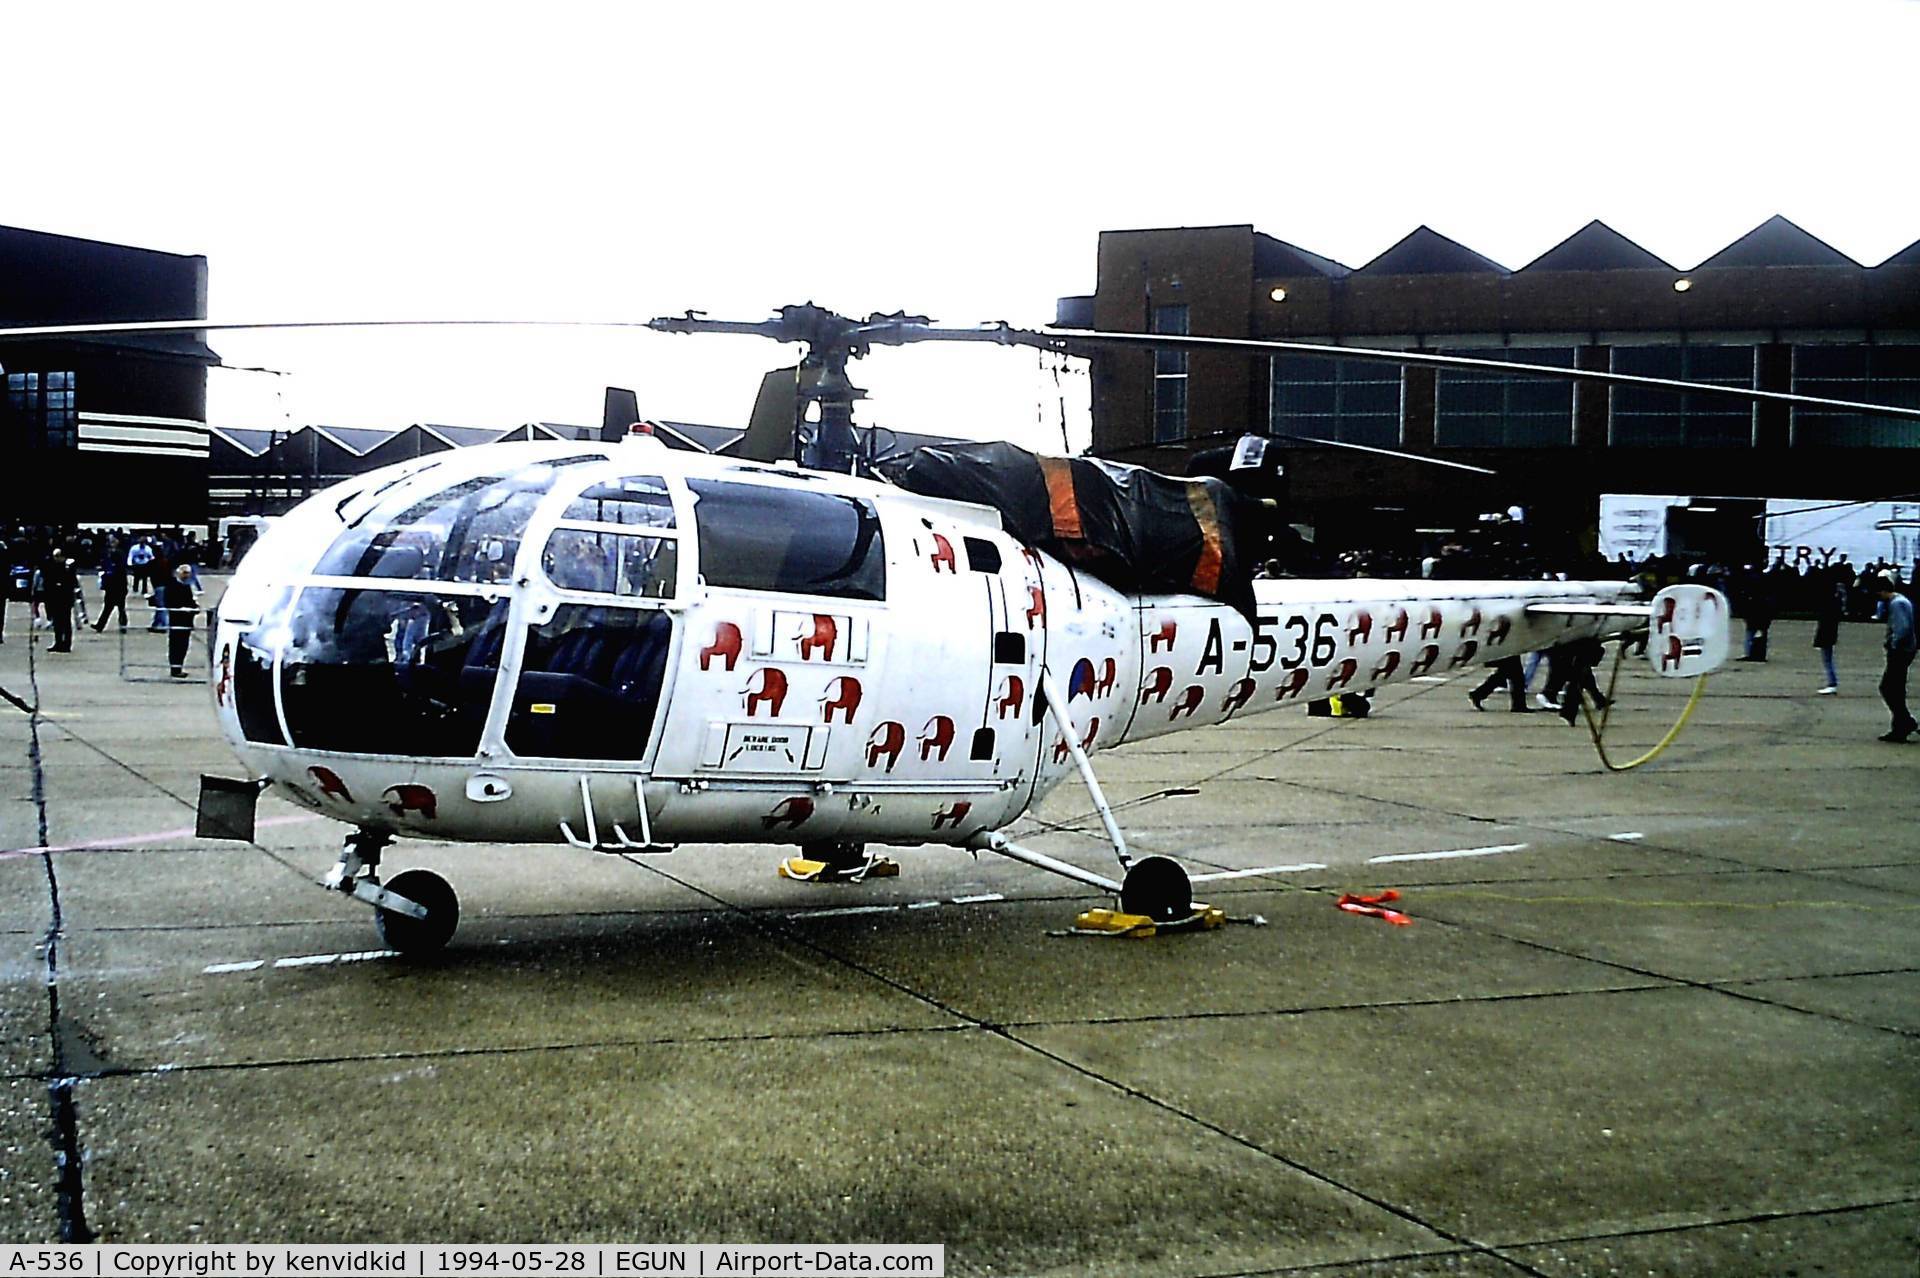 A-536, 1969 Sud SE-3160 Alouette III C/N 1536, At Air Fete 1994.